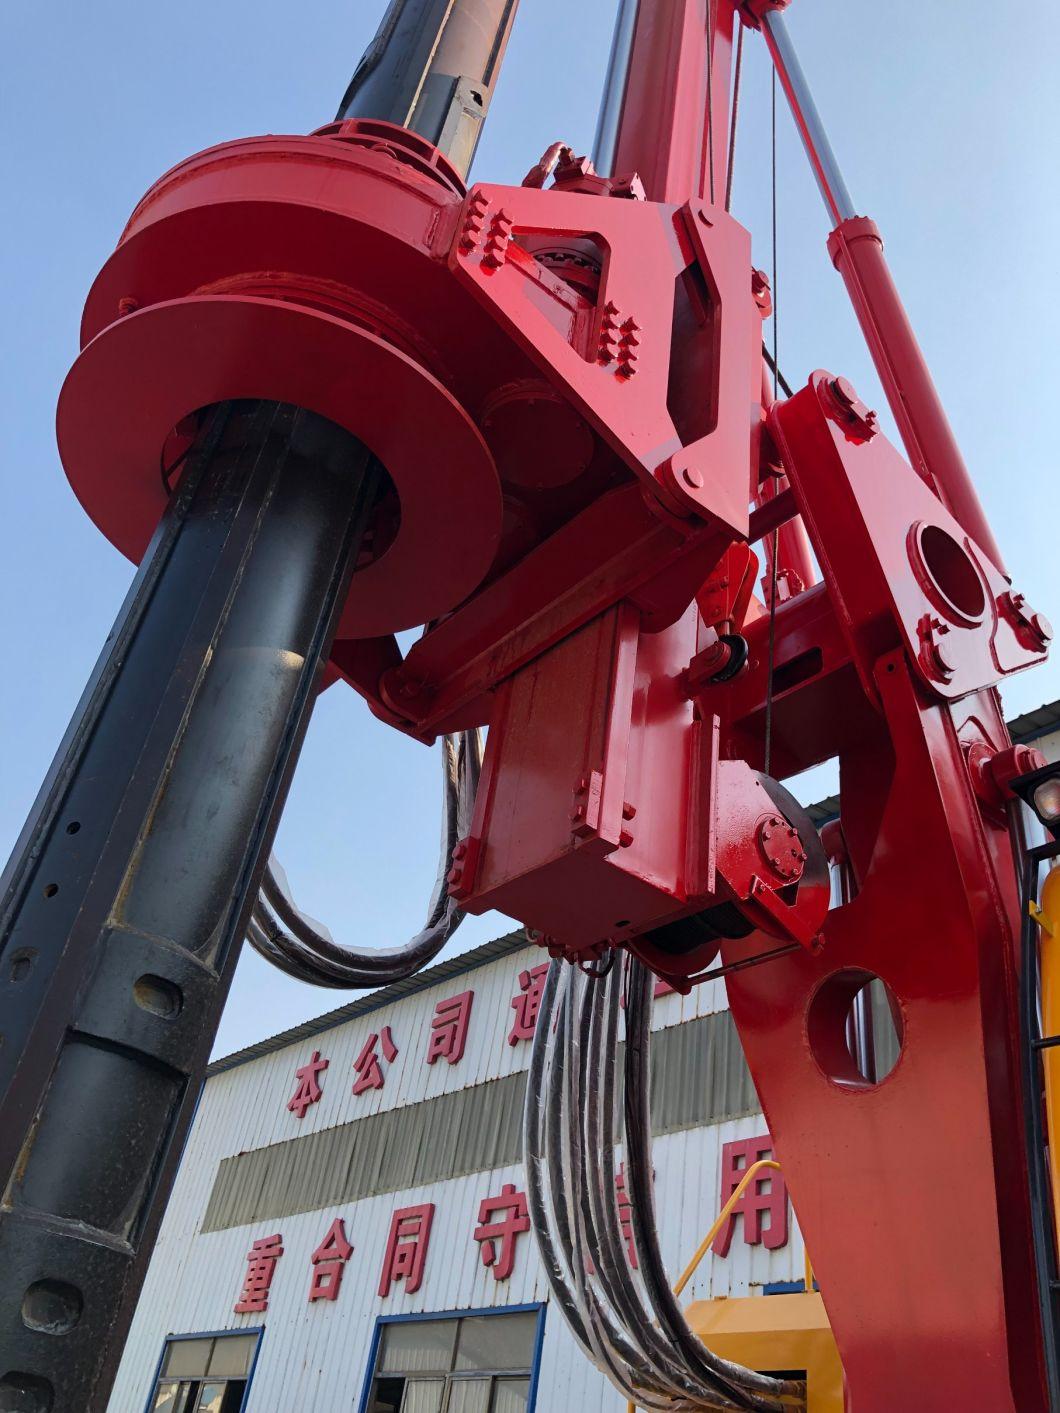 Reliable Excavator Mounted Pile Machine for Sheet Piling